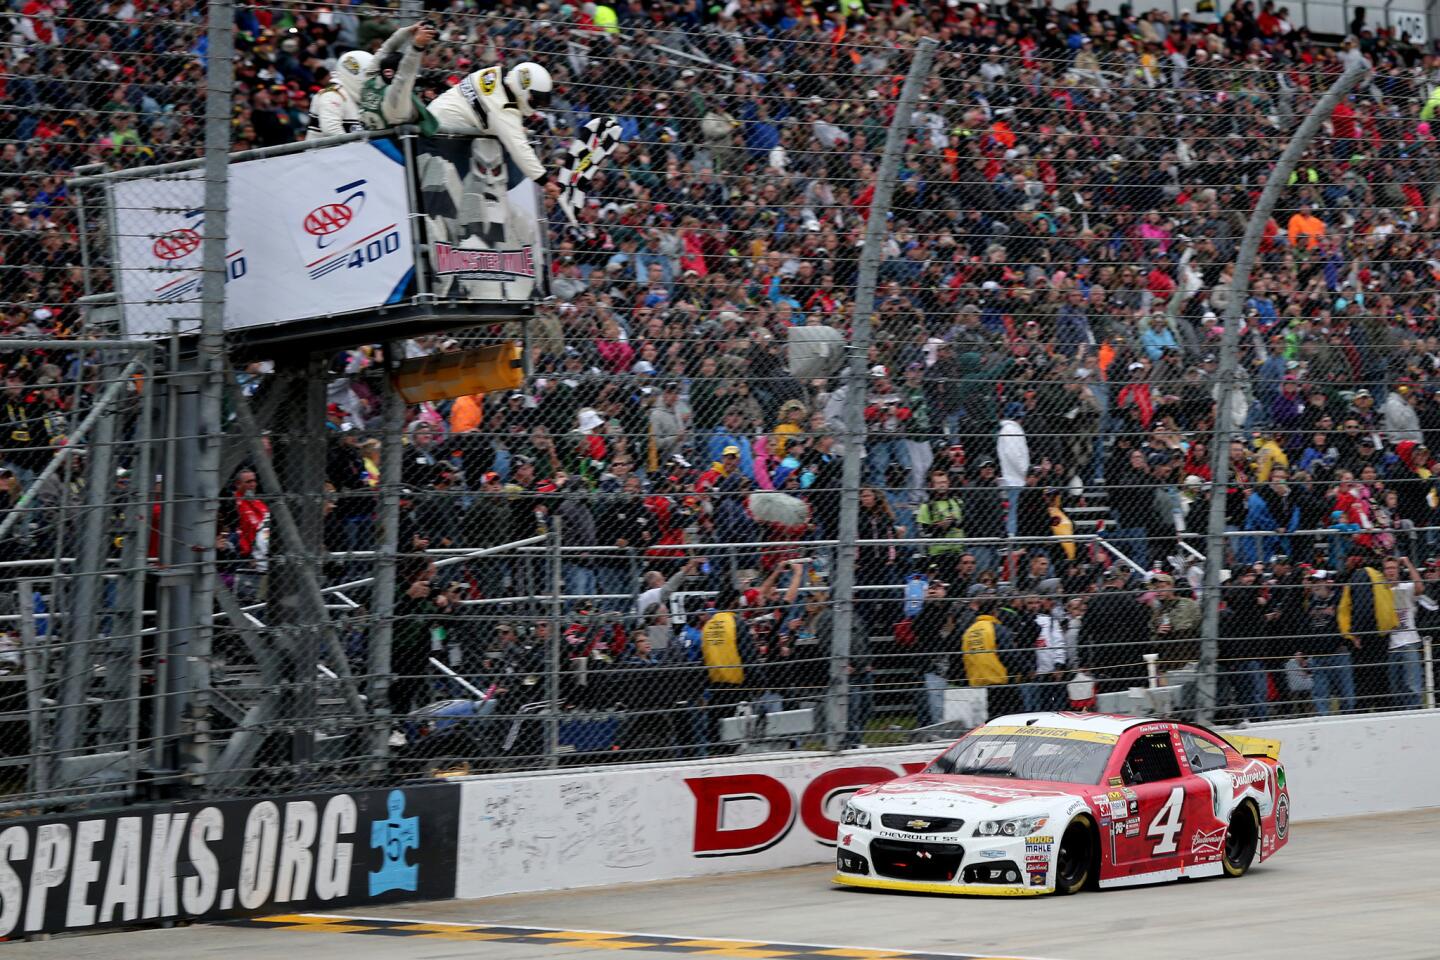 Dover Chase race No. 3: Kevin Harvick